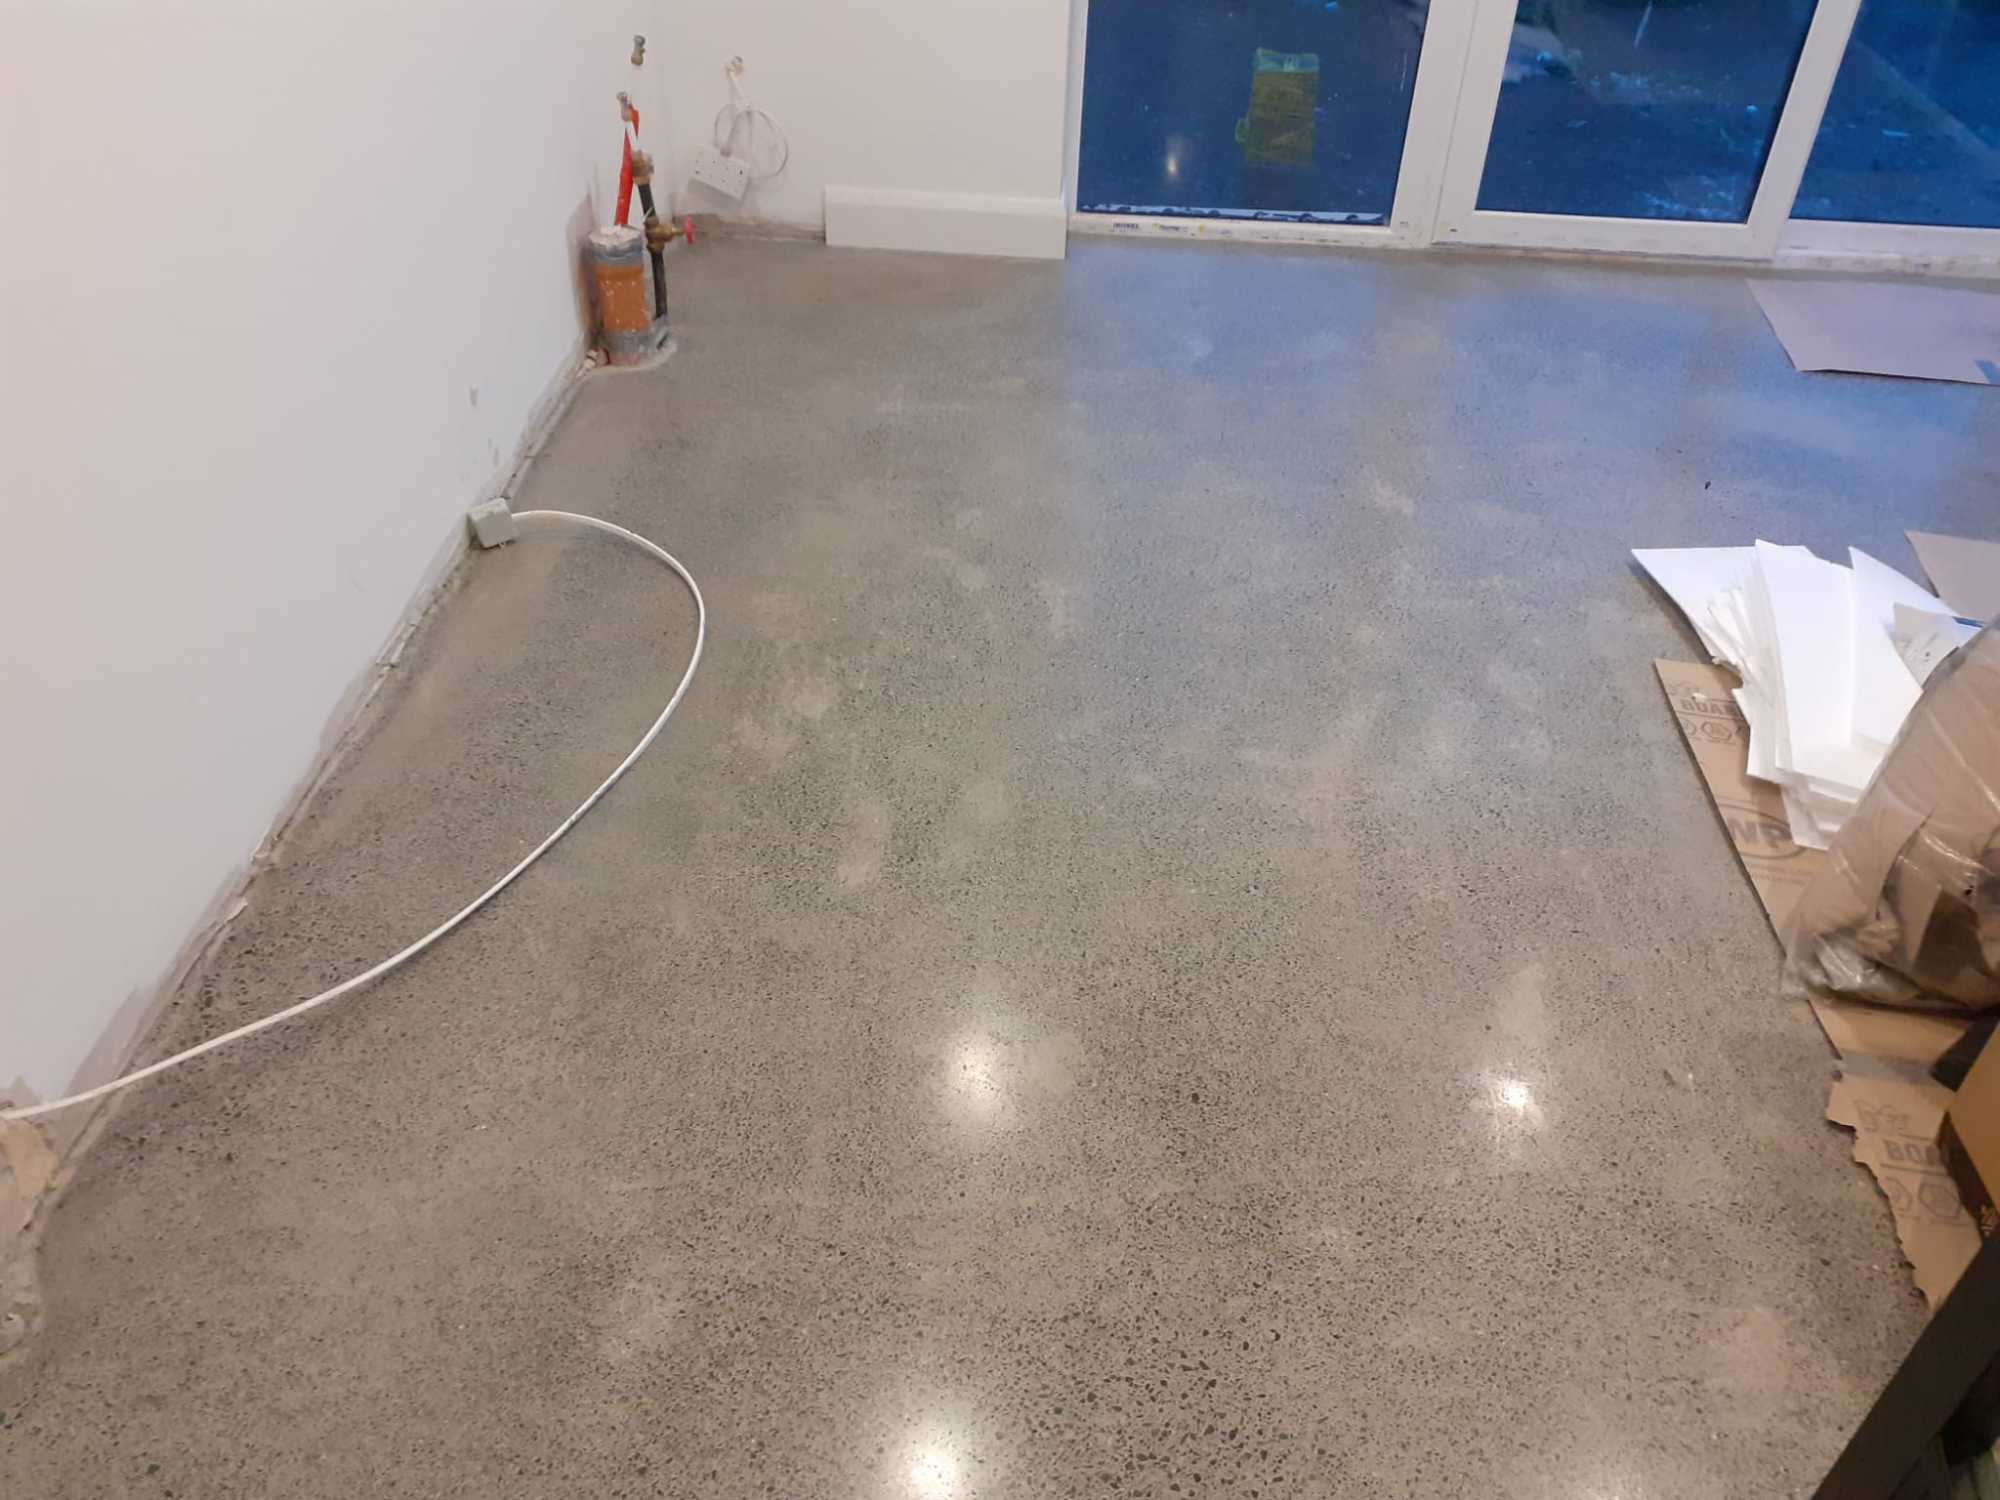 Footprints in polished concrete